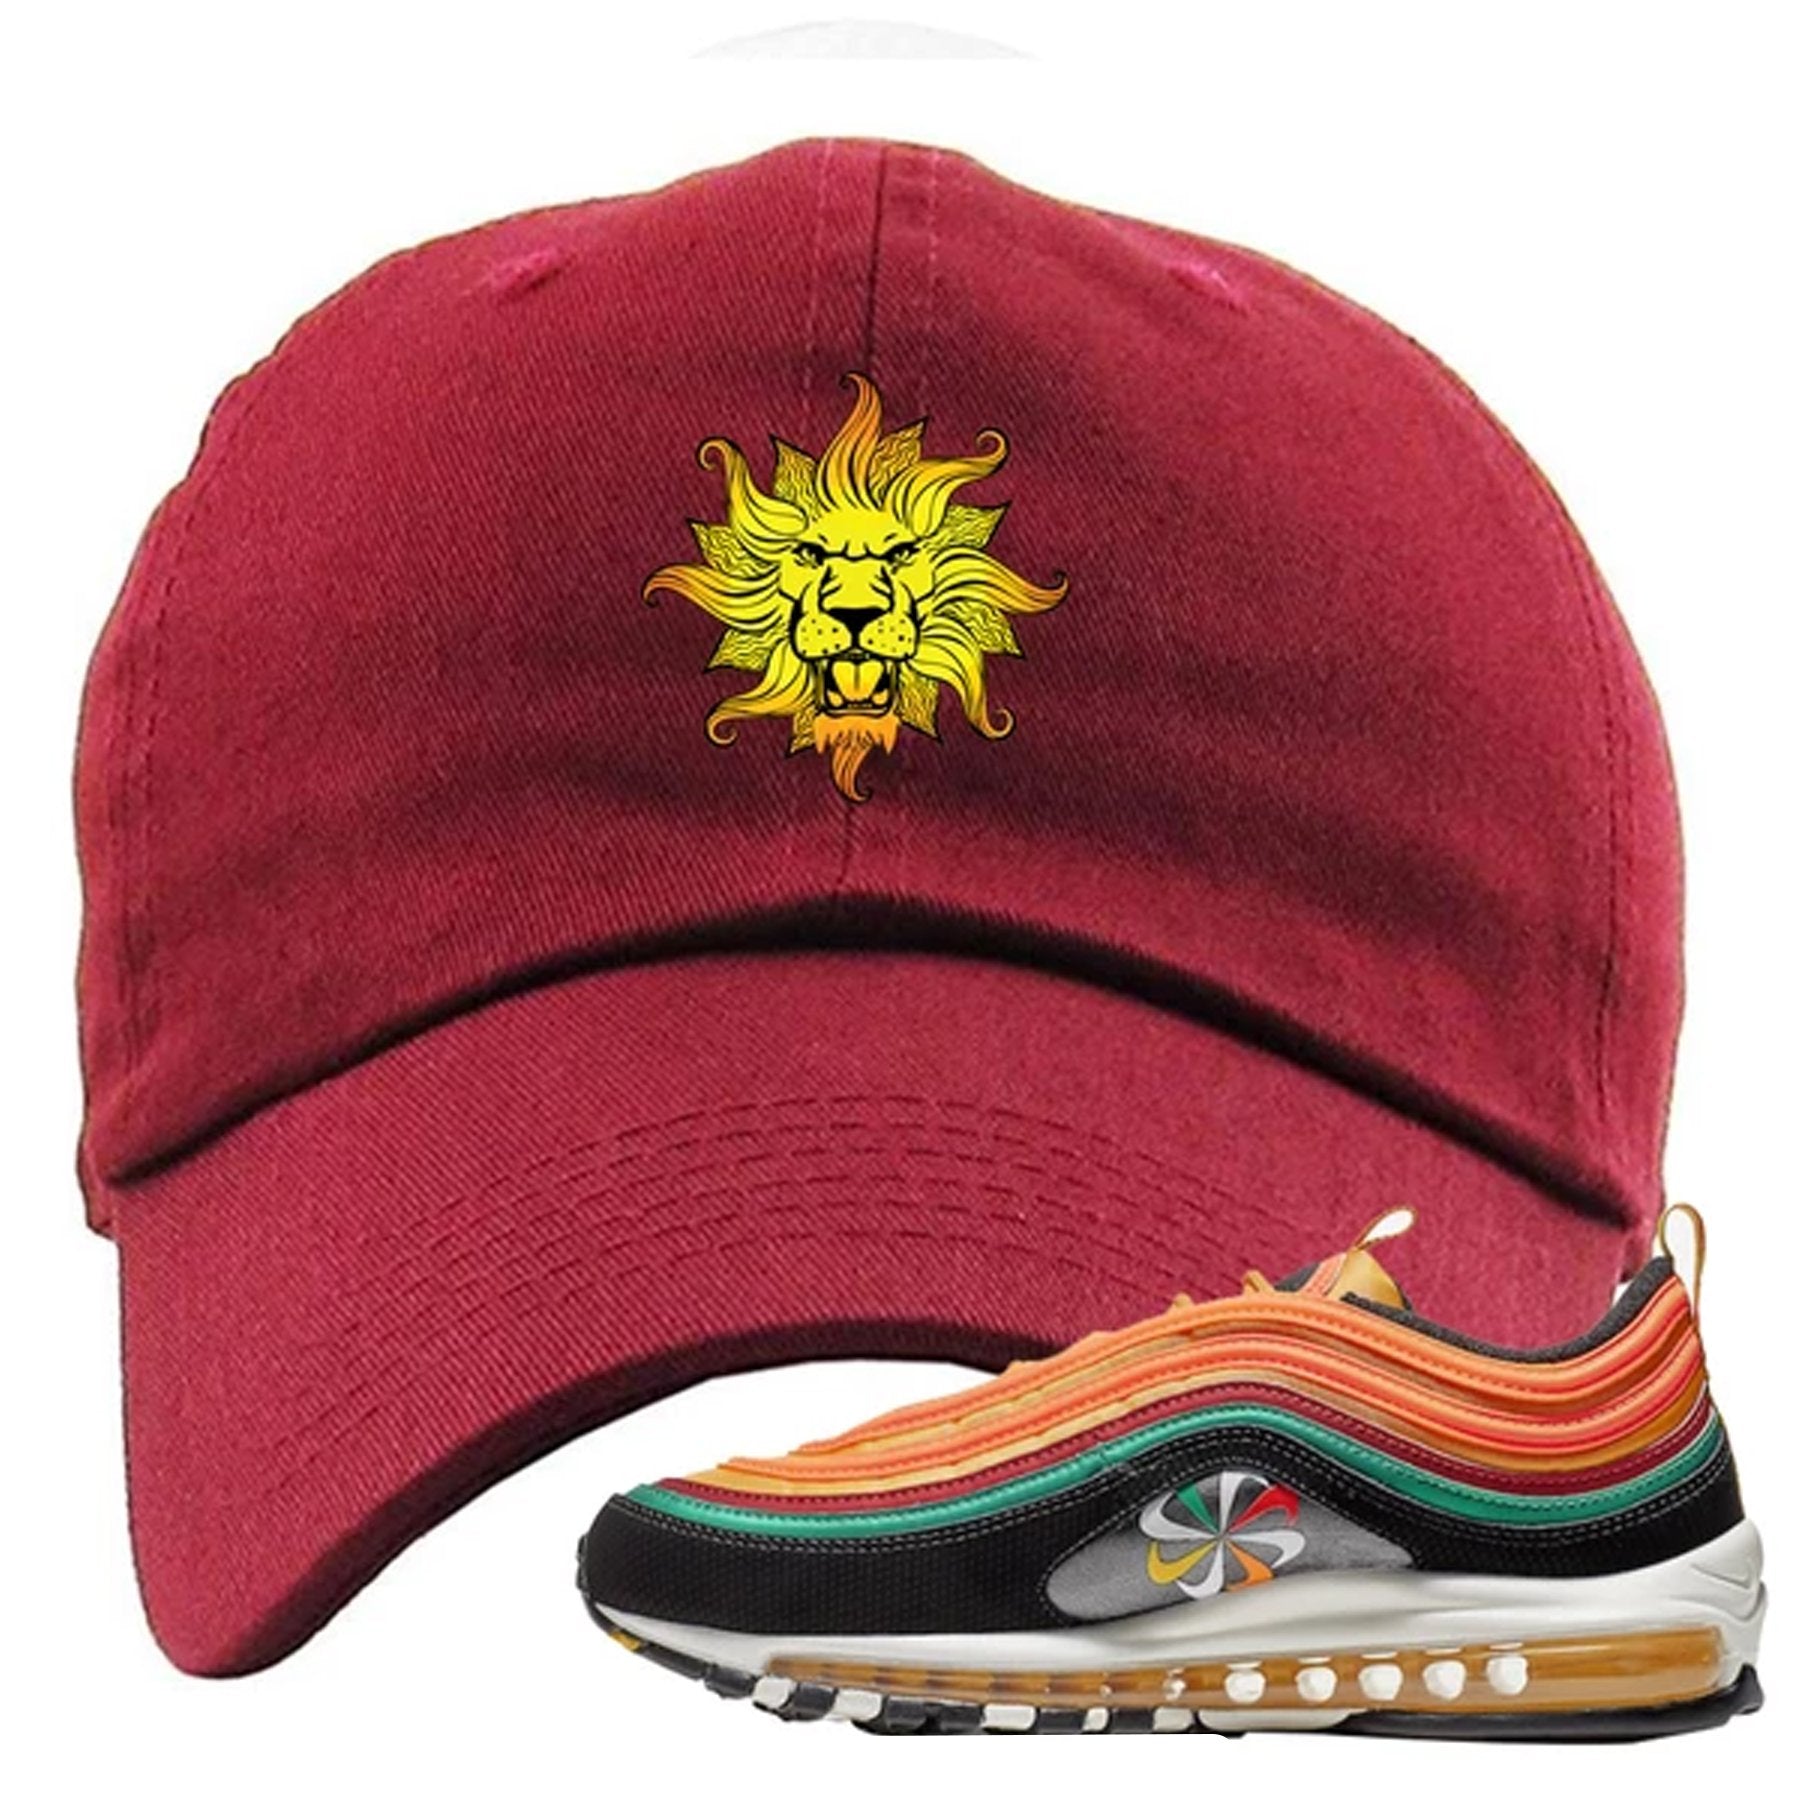 Embroidered on the front of the Air Max 97 Sunburst sneaker matching maroon dad hat is the Vintage Lion Head logo